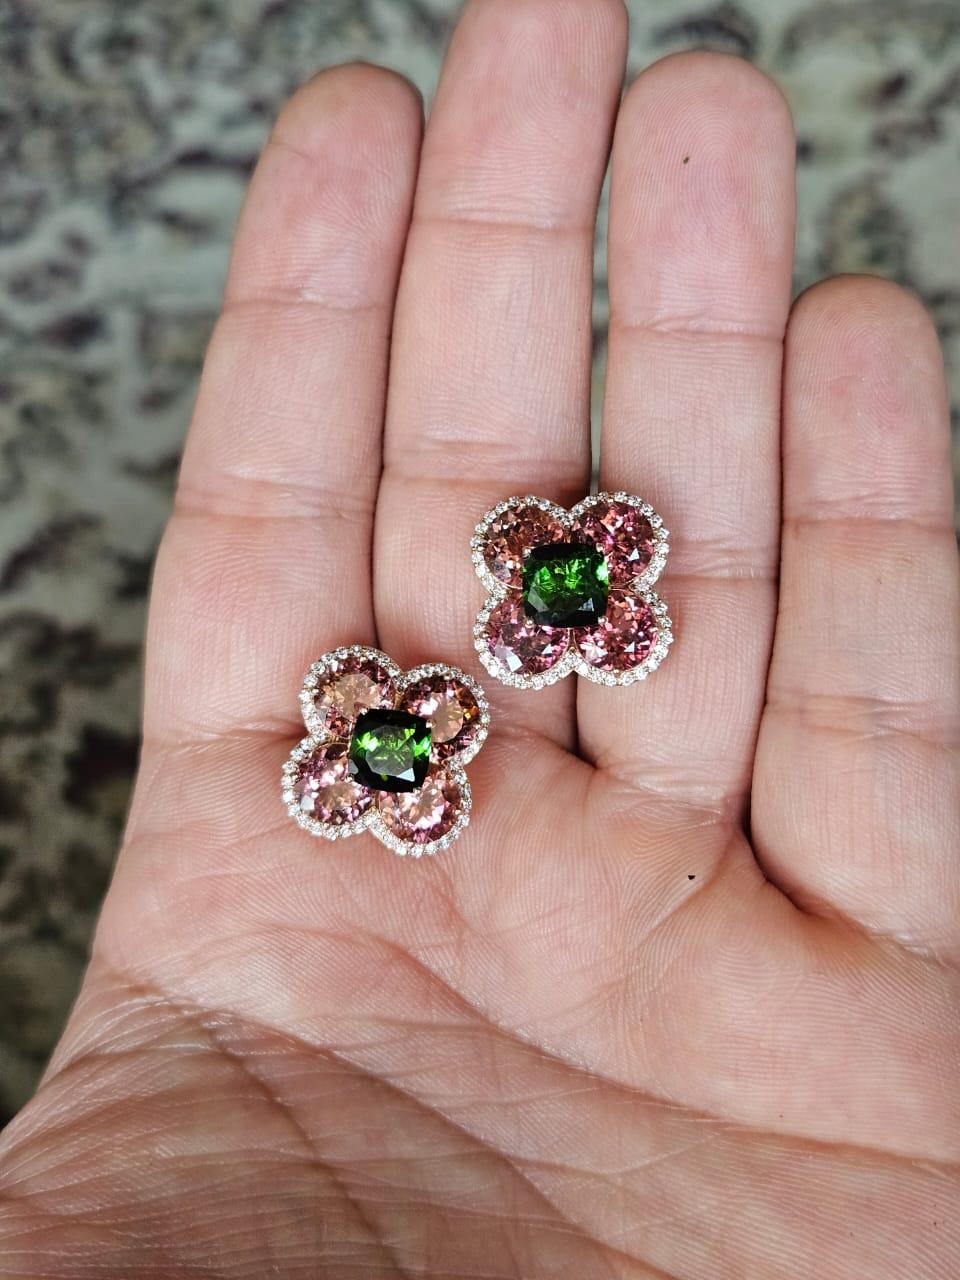 A very gorgeous and beautiful, modern style, Tourmaline Stud Earrings set in 18K White Gold & Diamonds. The combined weight of the Pink & Green Tourmaline is 13.73 carats. The Diamonds weight is 0.55 carats. Net 18K Gold weight is 7.23 grams. The